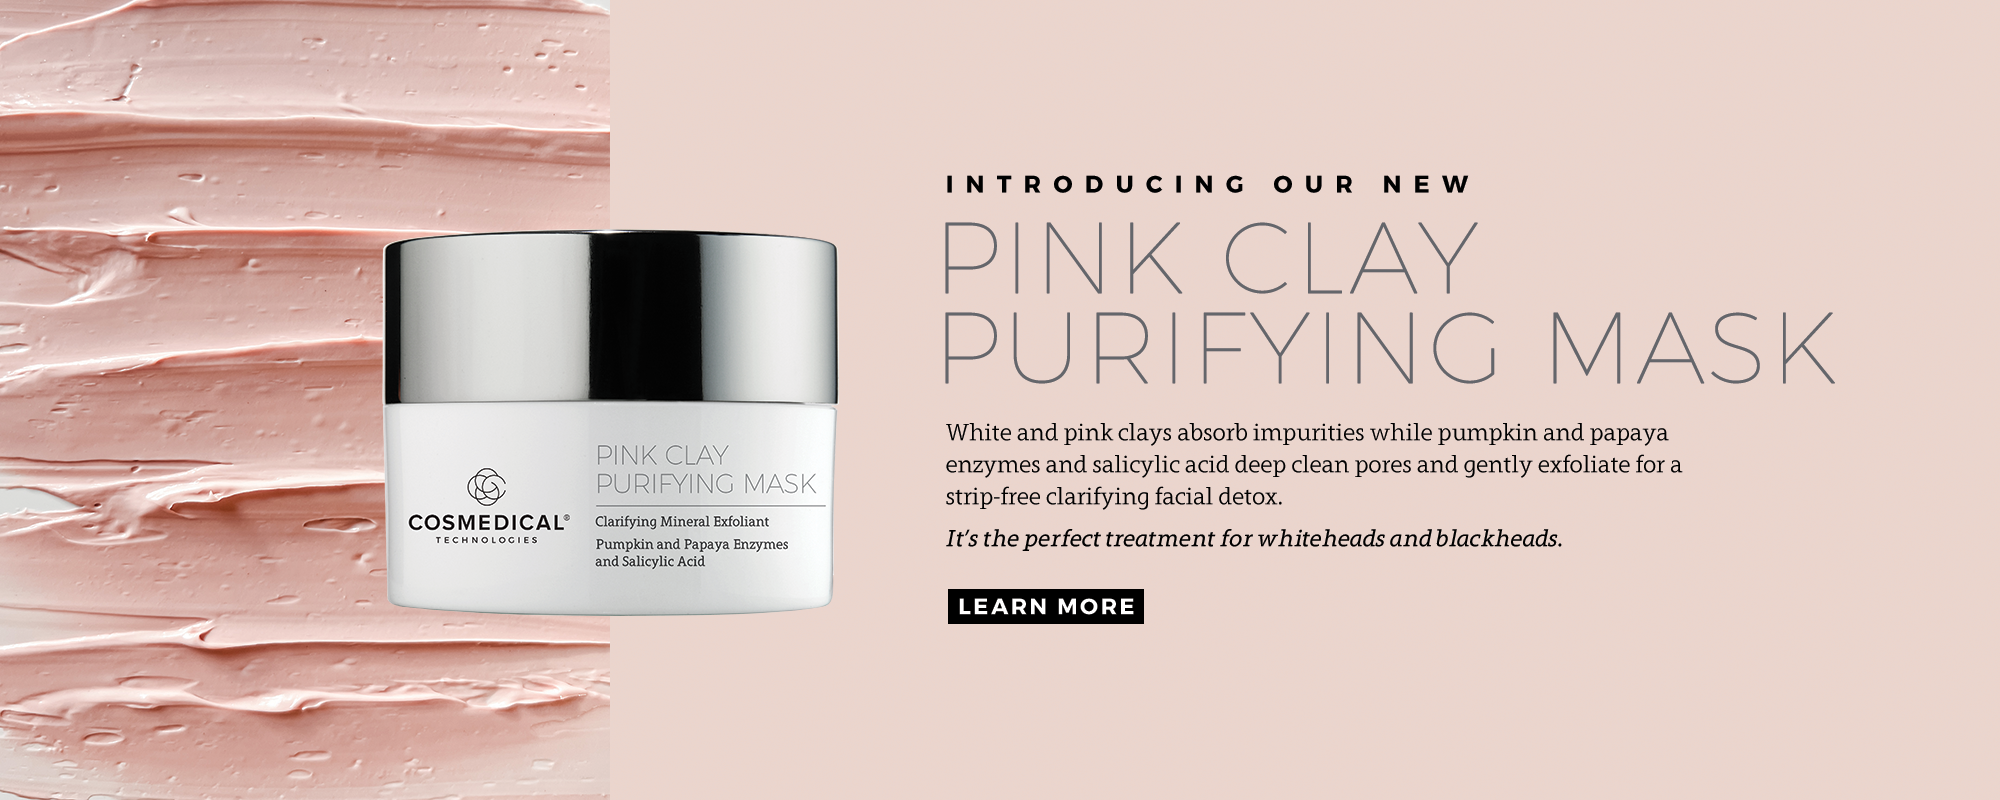 Pink-Clay-Purifying-Mask-Homepage-Banner.png